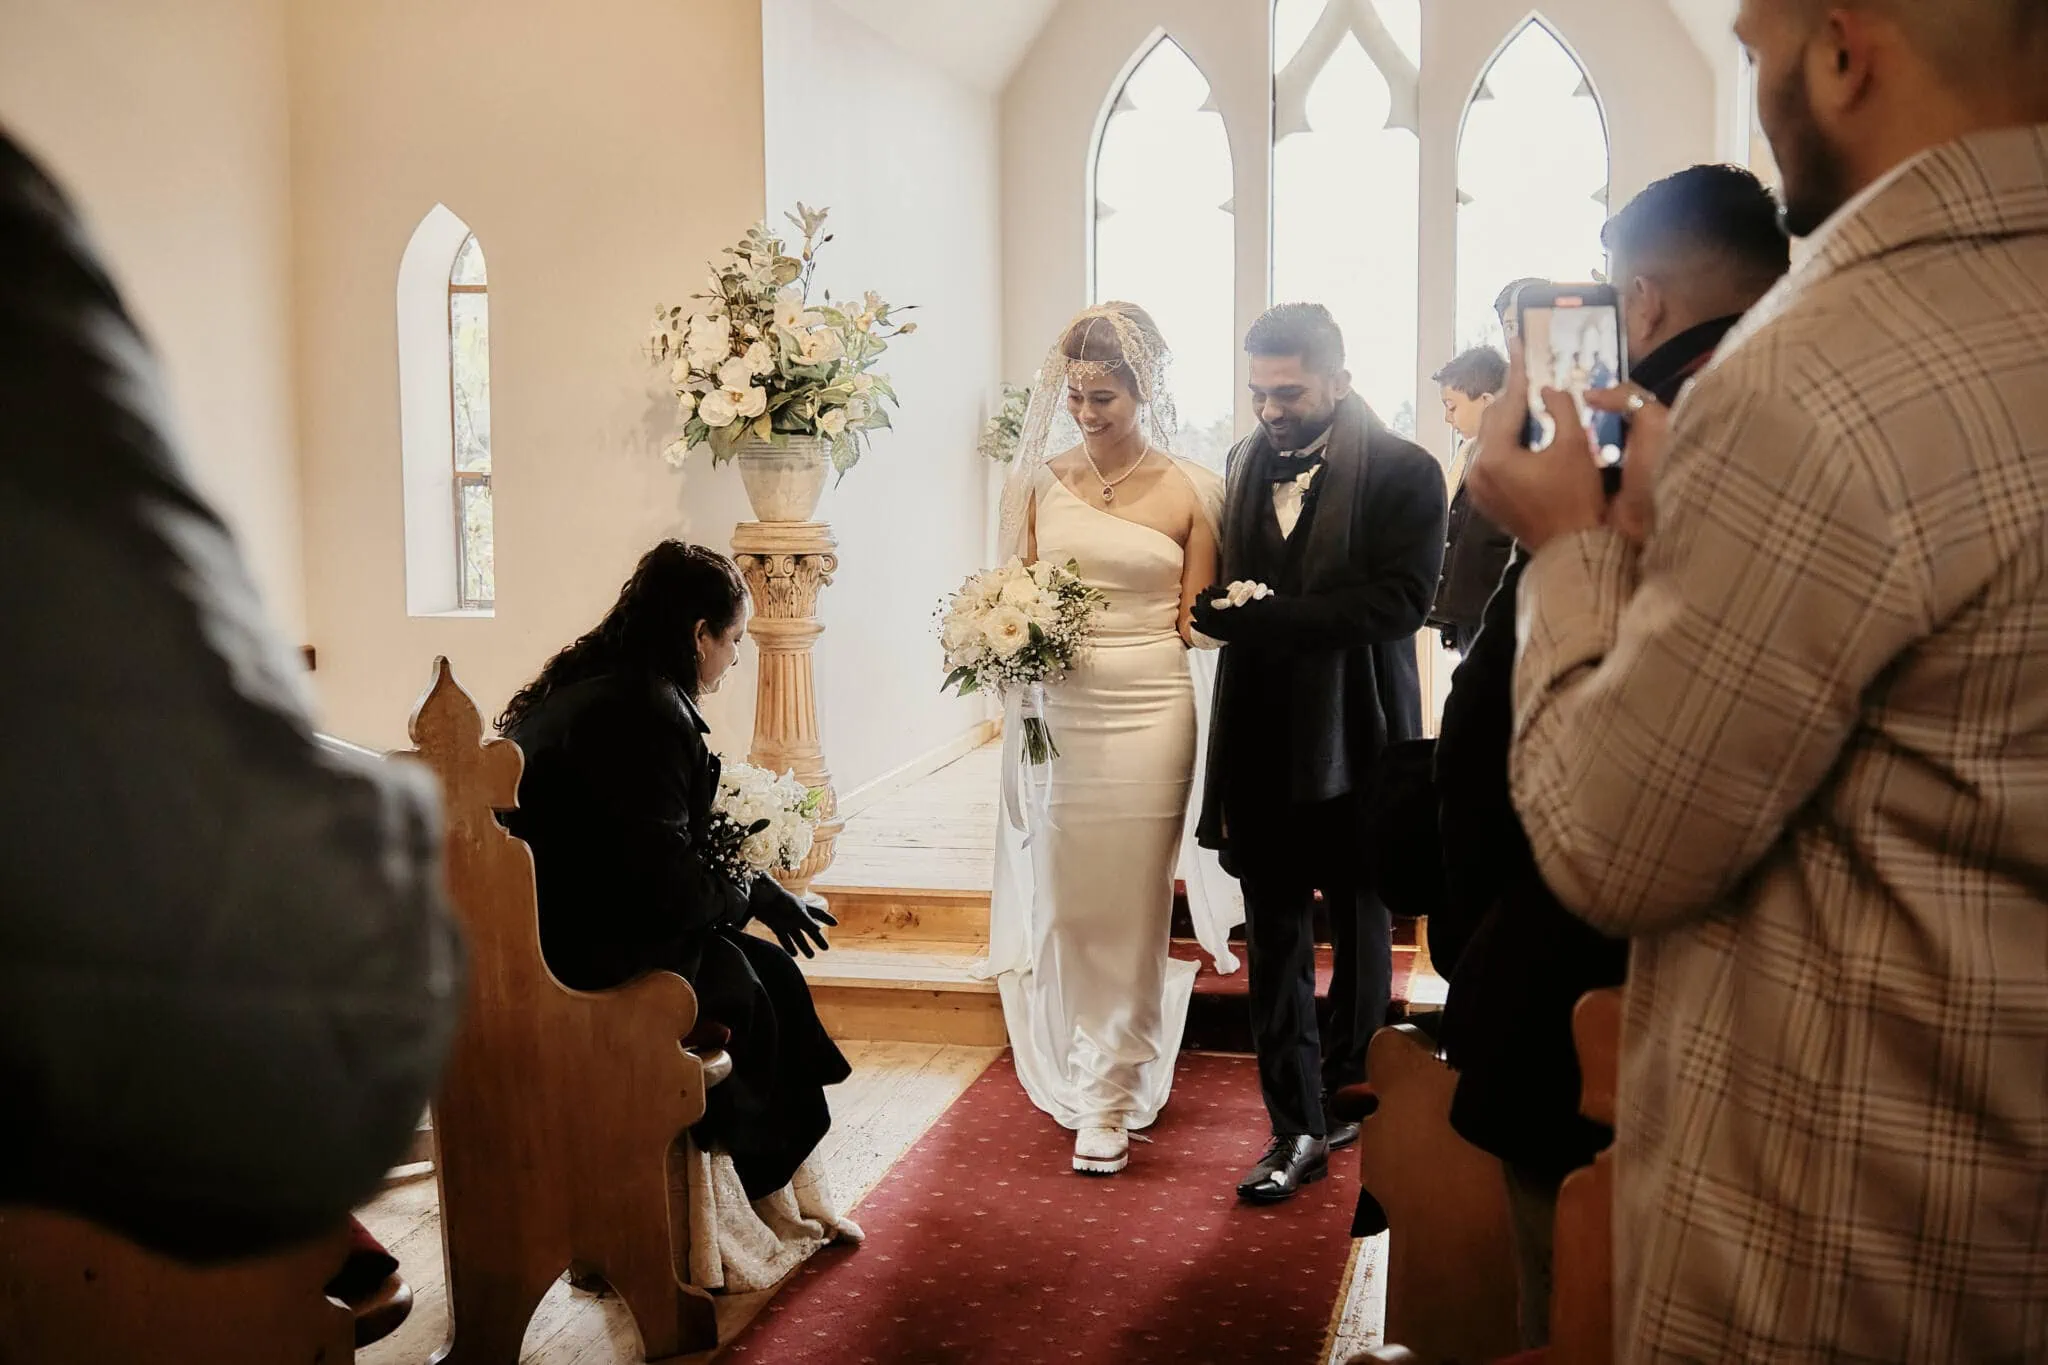 Queenstown New Zealand Elopement Wedding Photographer - Keywords used: bride and groom, walking down the aisle, church

Description modified: Wasim and Yumn walking down the aisle of a church for their Queenstown Islamic wedding.